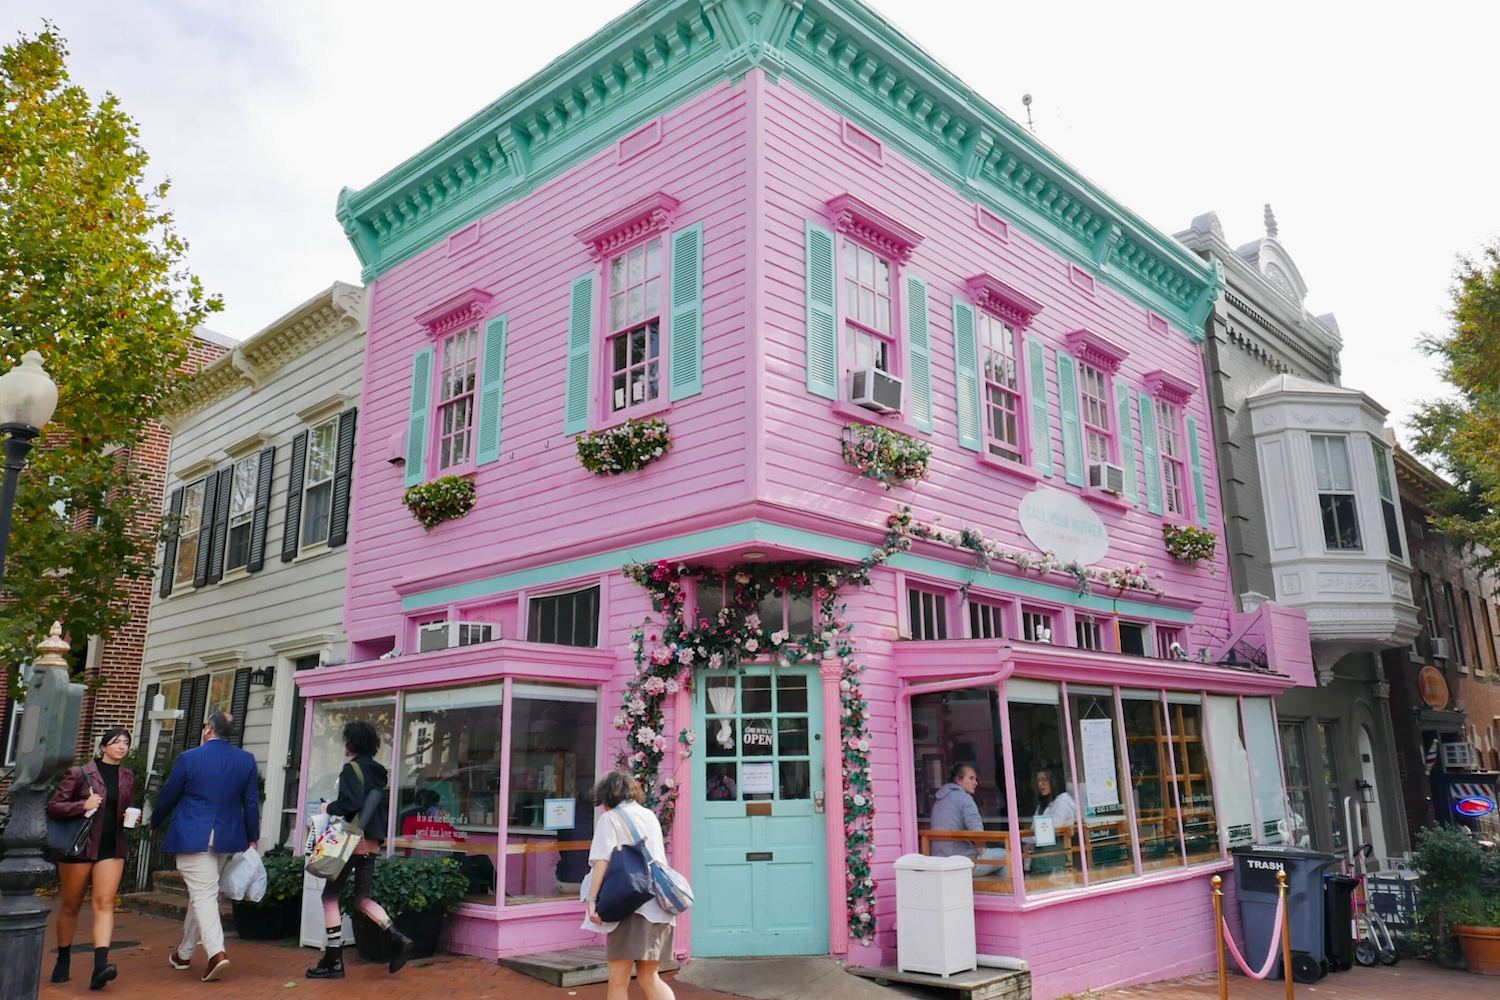 Bright pink building with light blue and teal-green accents on the corner of a street